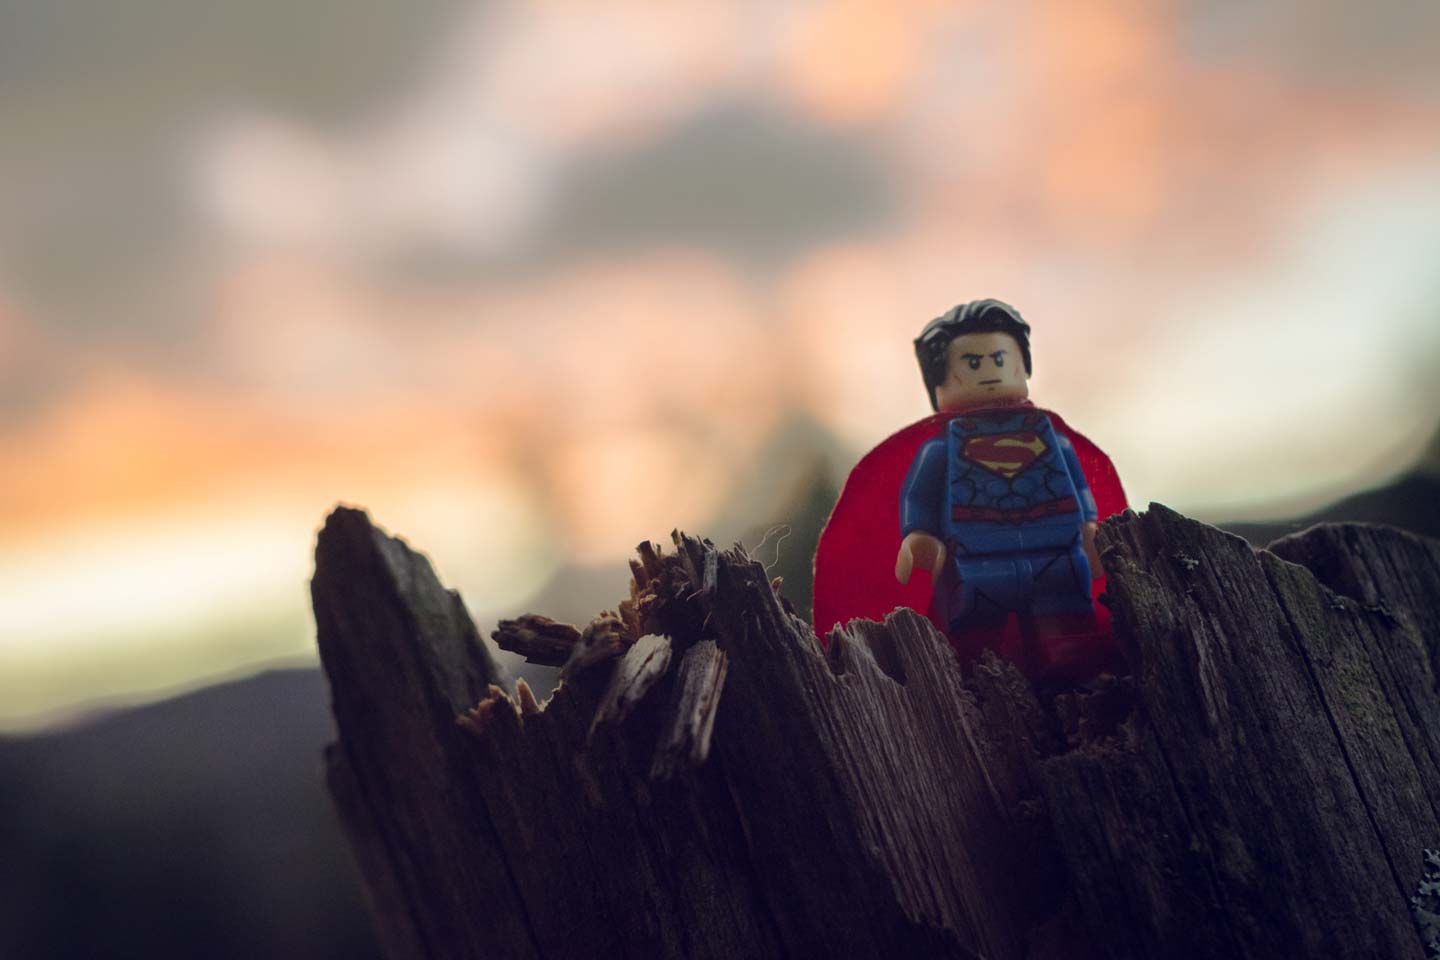 superman lego piece helping others out of weakness